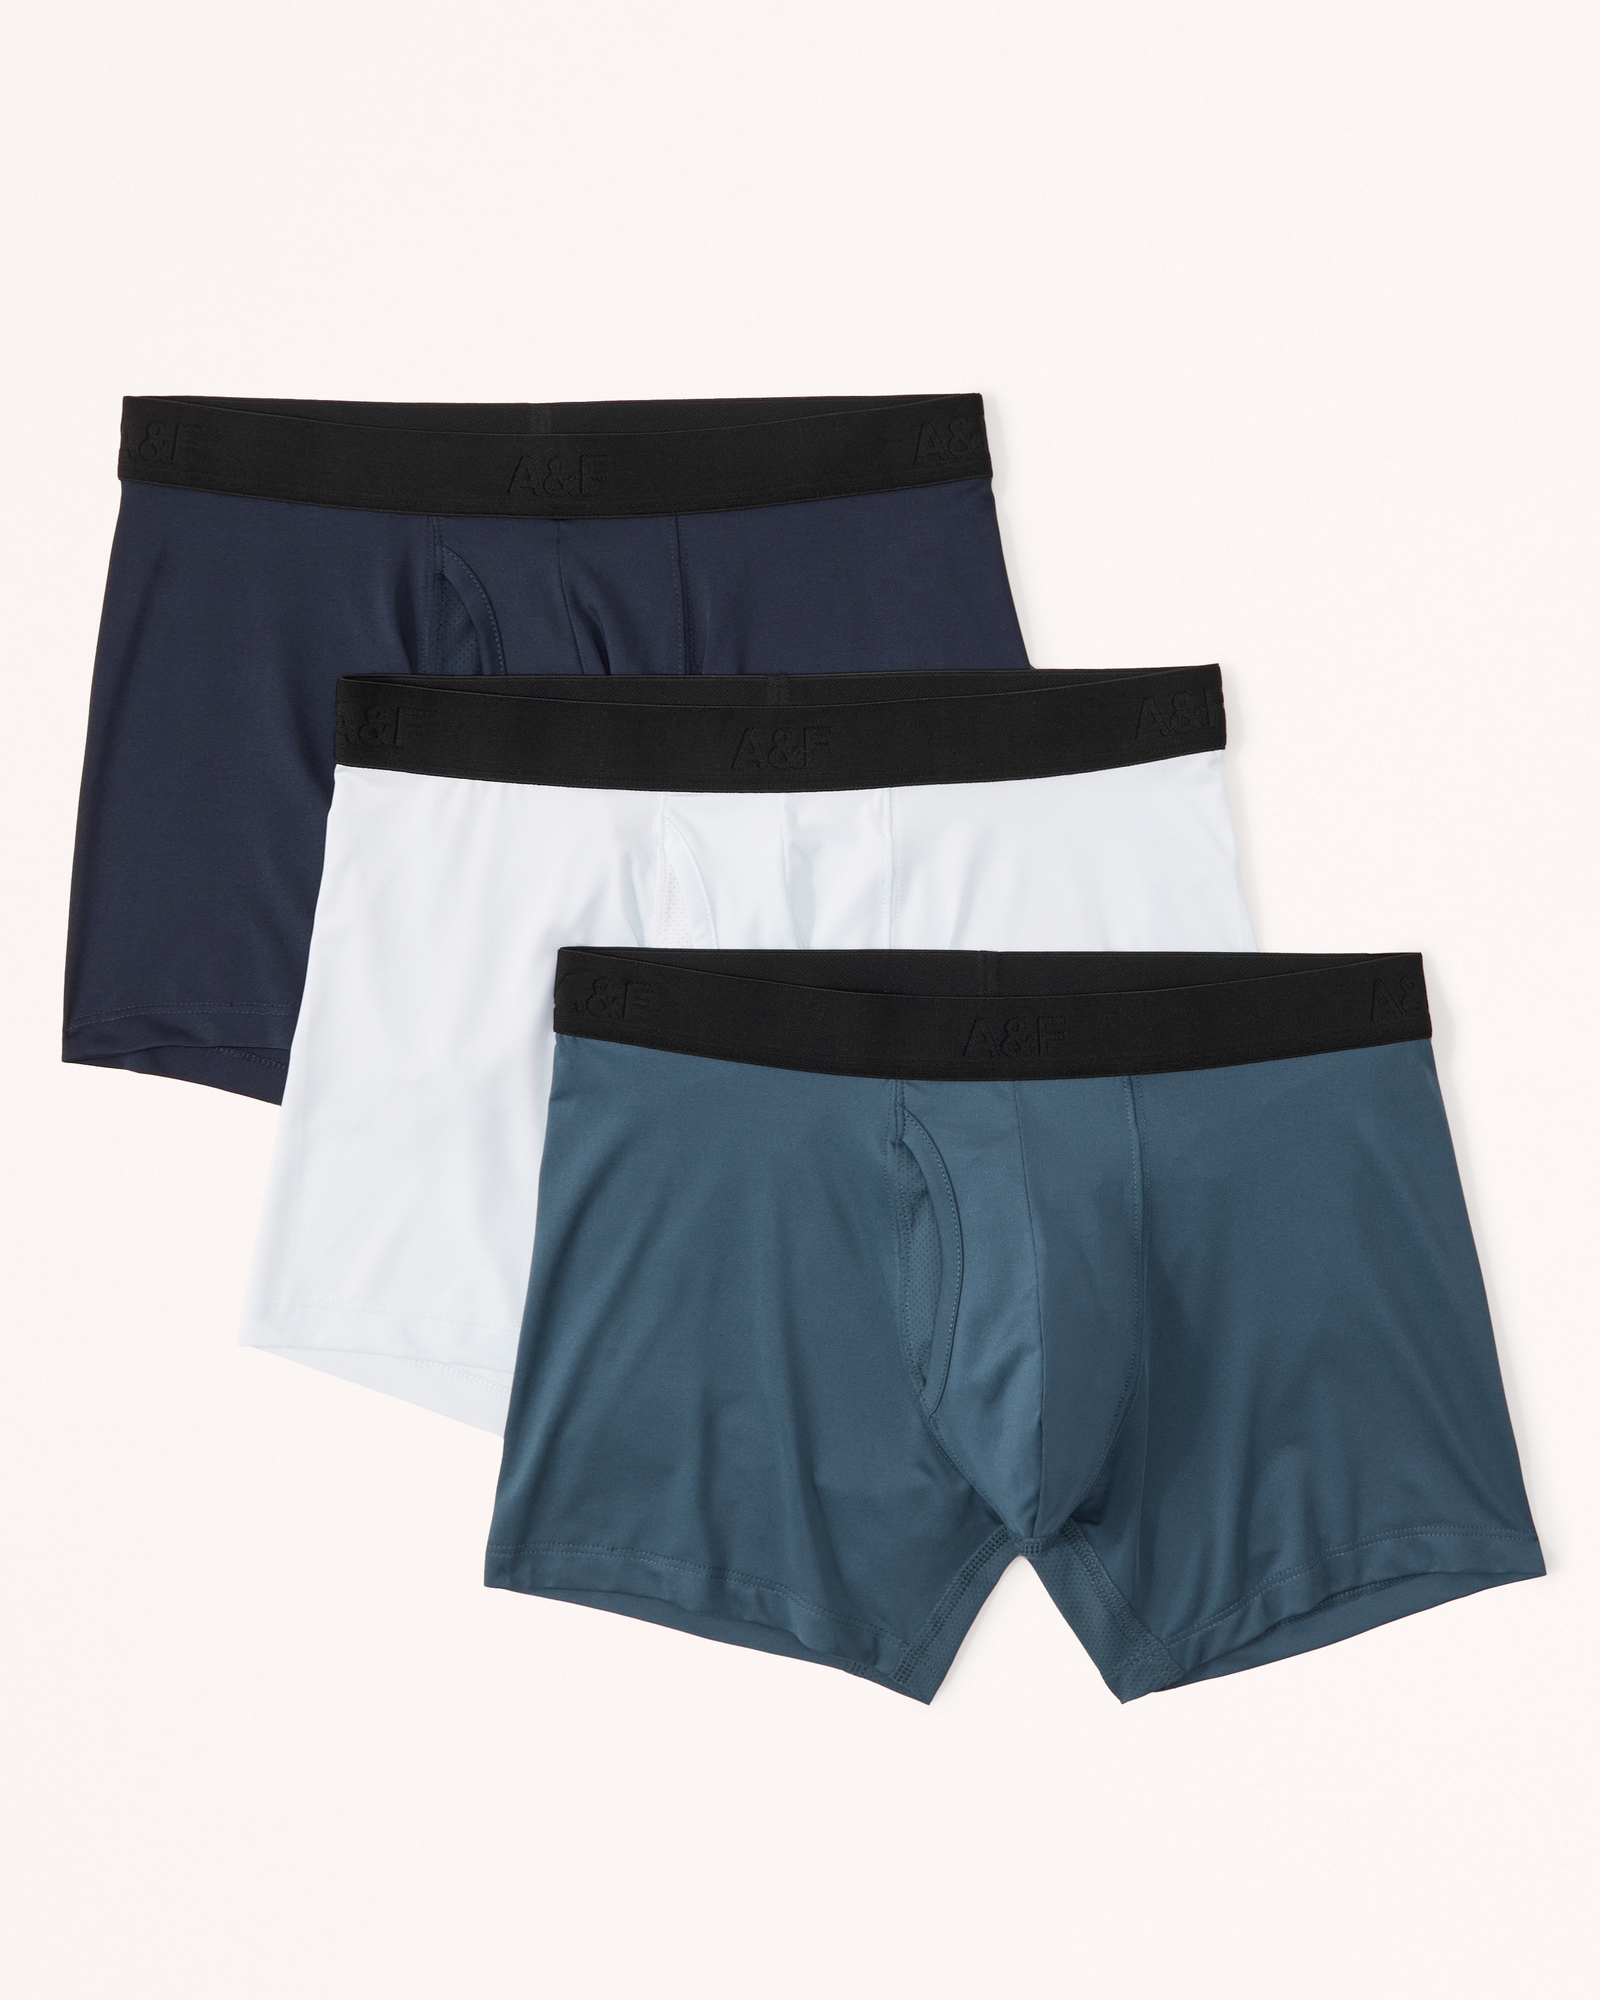 F&F Trunks 3 Pieces in a Pack, XXL, Blue and Navy - Tesco Groceries